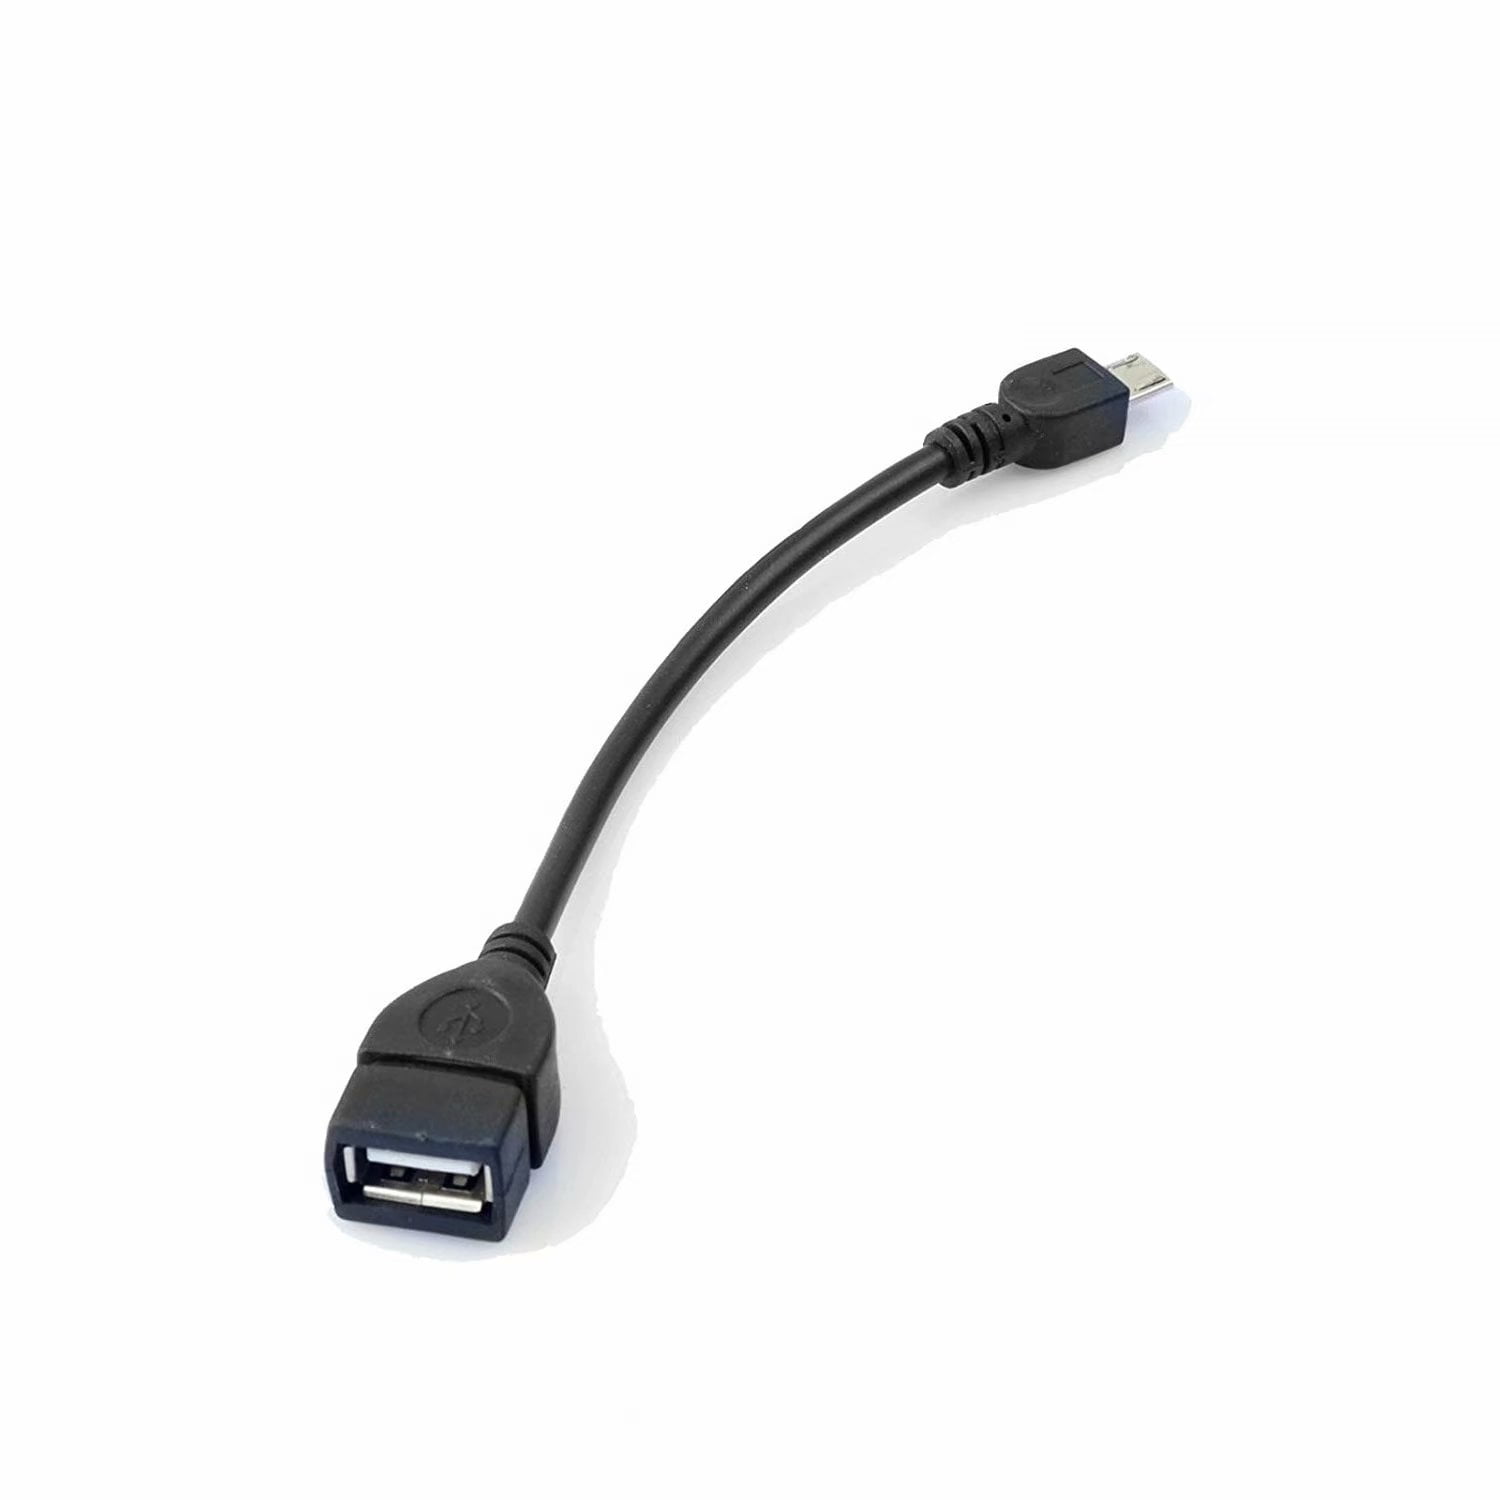 Micro-USB to USB 2.0 Right Angle Adapter works for Samsung SM-G900 is High Speed Data-Transfer Cable for connecting any compatible USB Accessory/Device/Drive/Flash/ and truly On-The-Go! OTG Black 